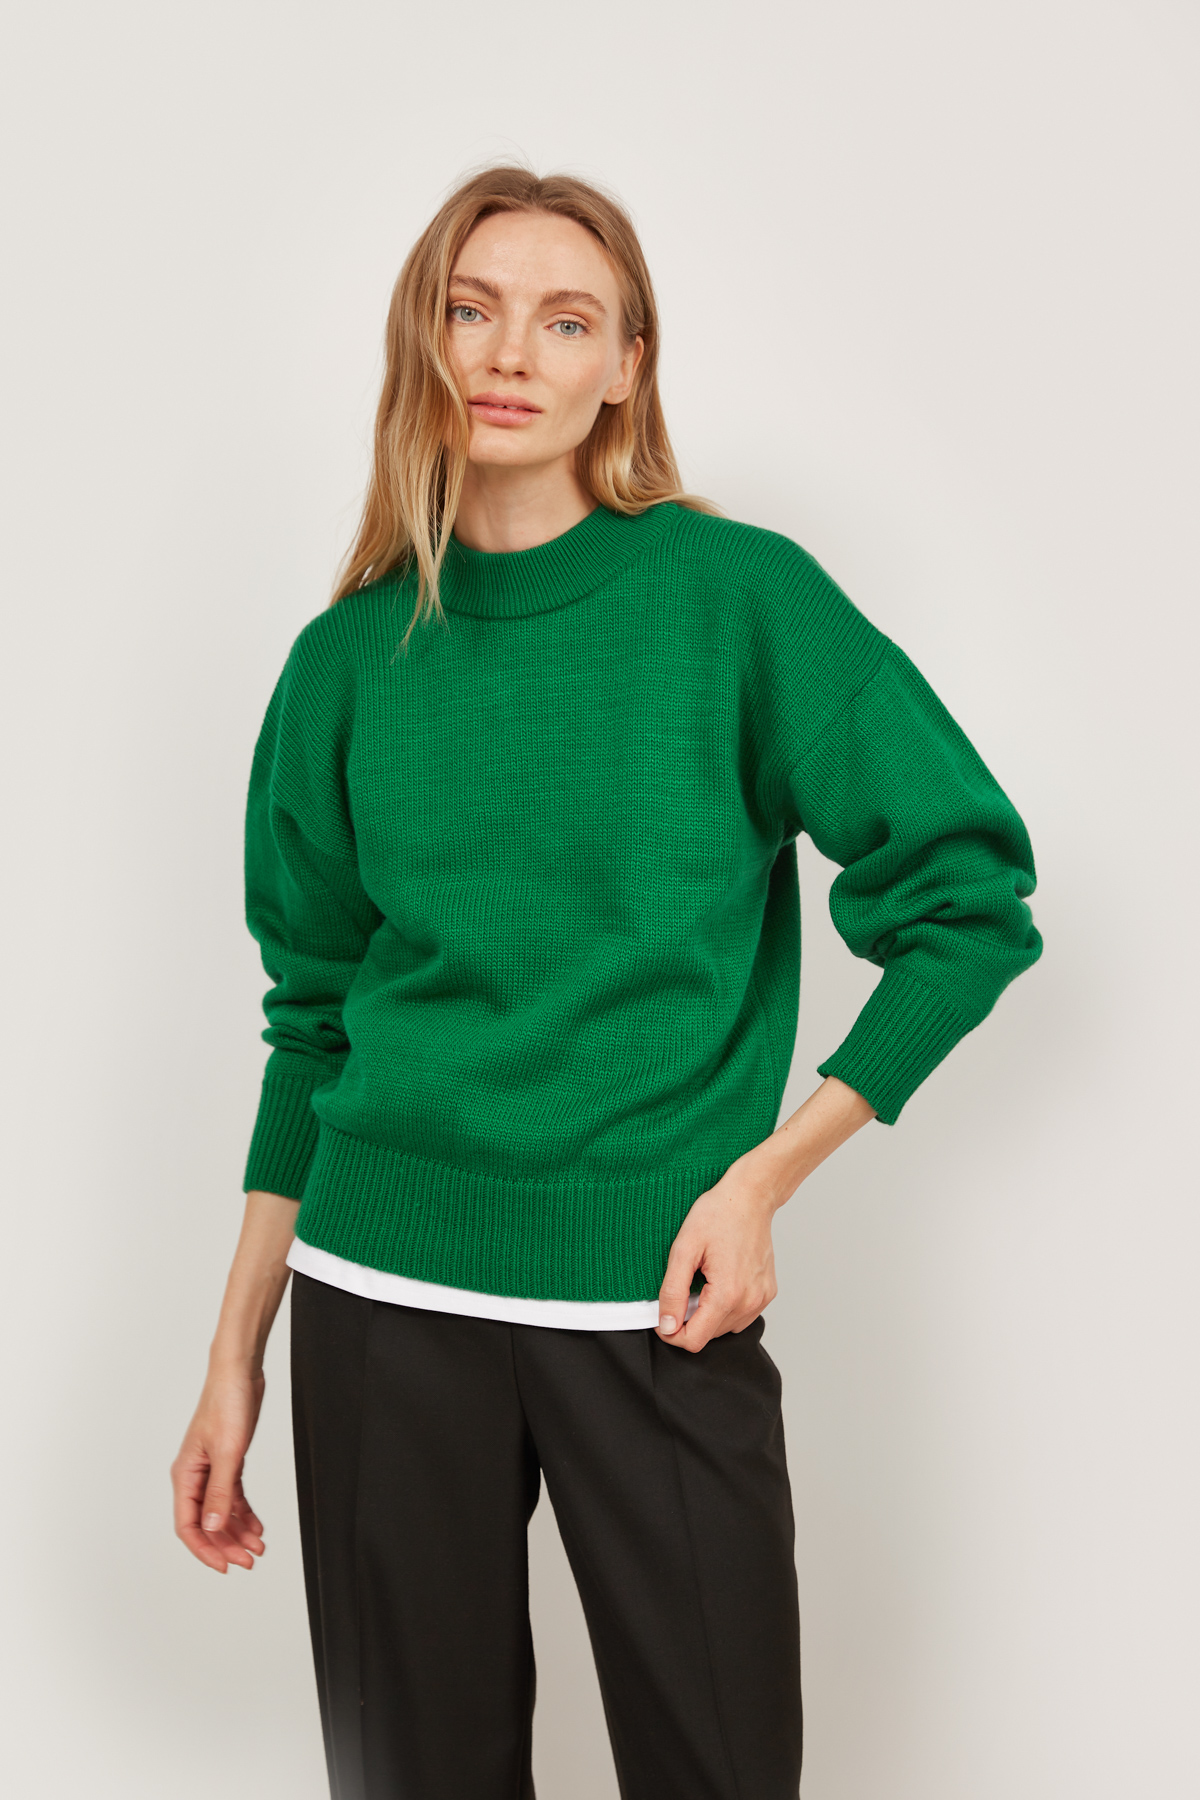 Bright green knitted sweater, photo 2